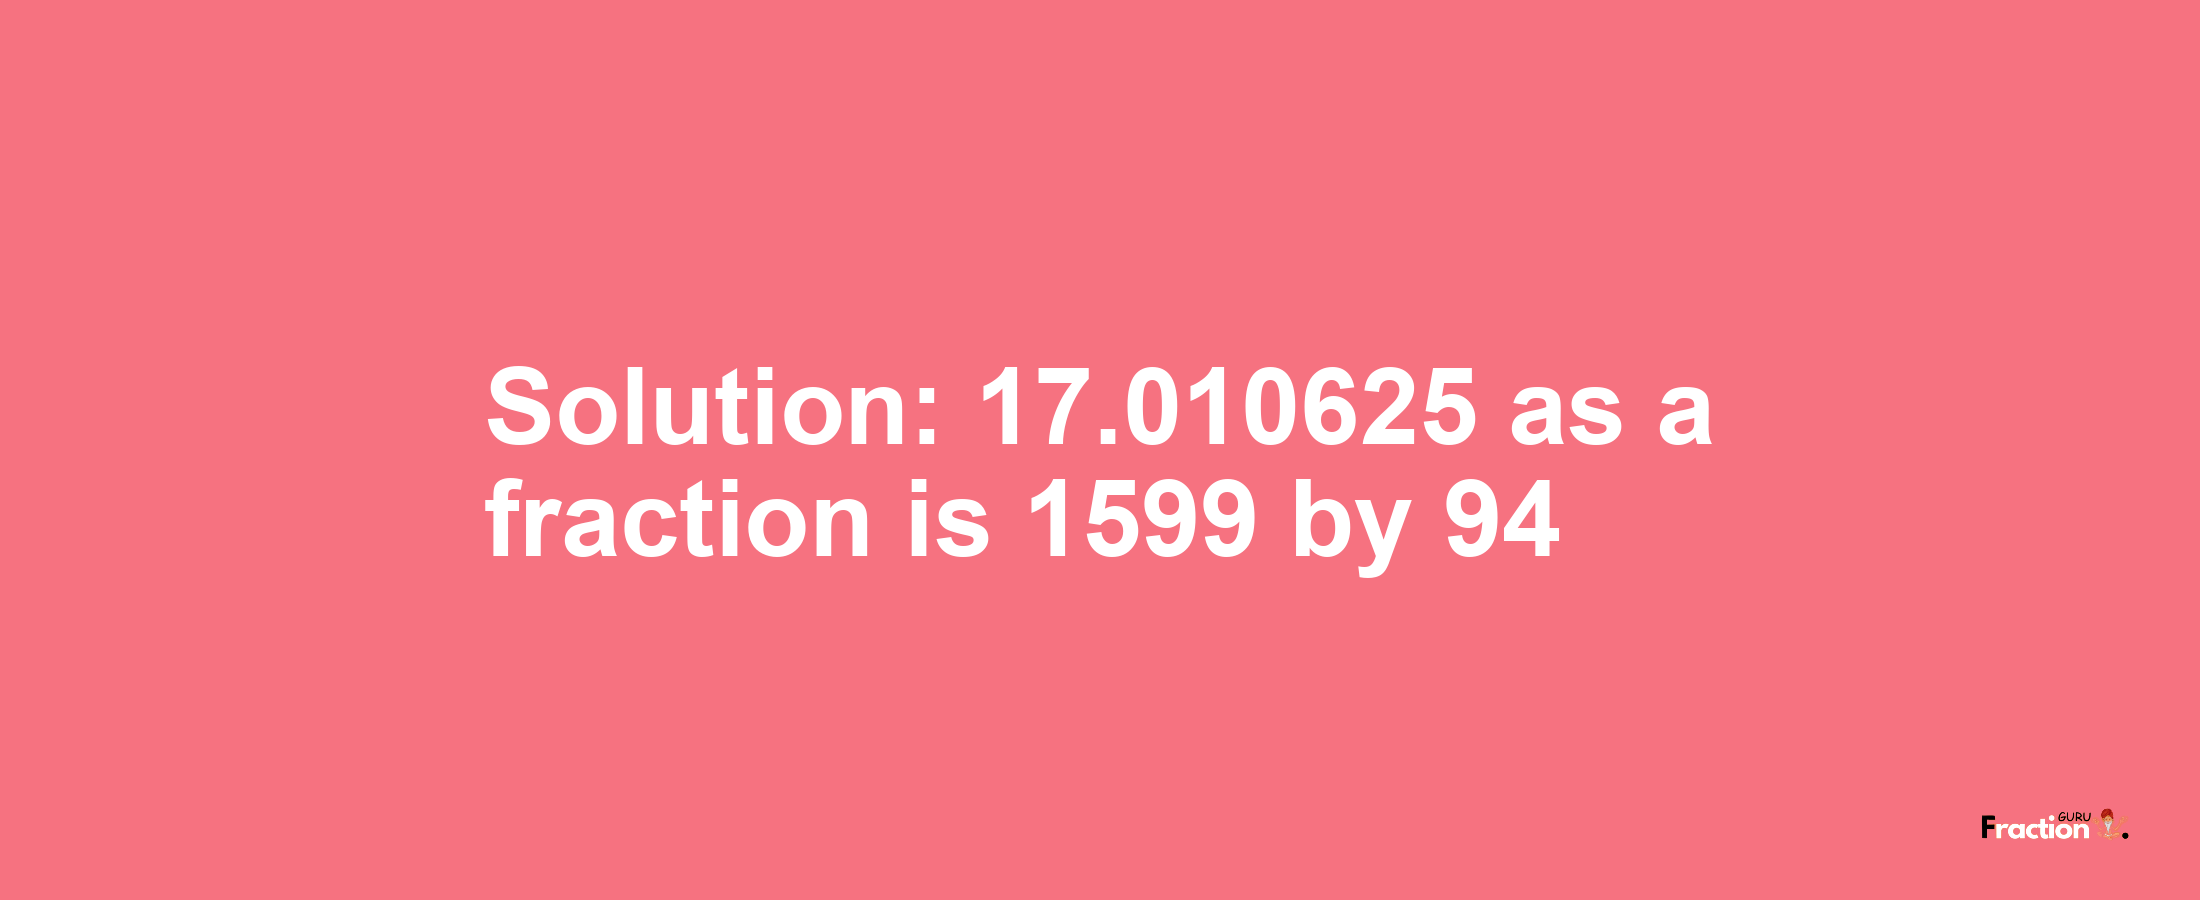 Solution:17.010625 as a fraction is 1599/94